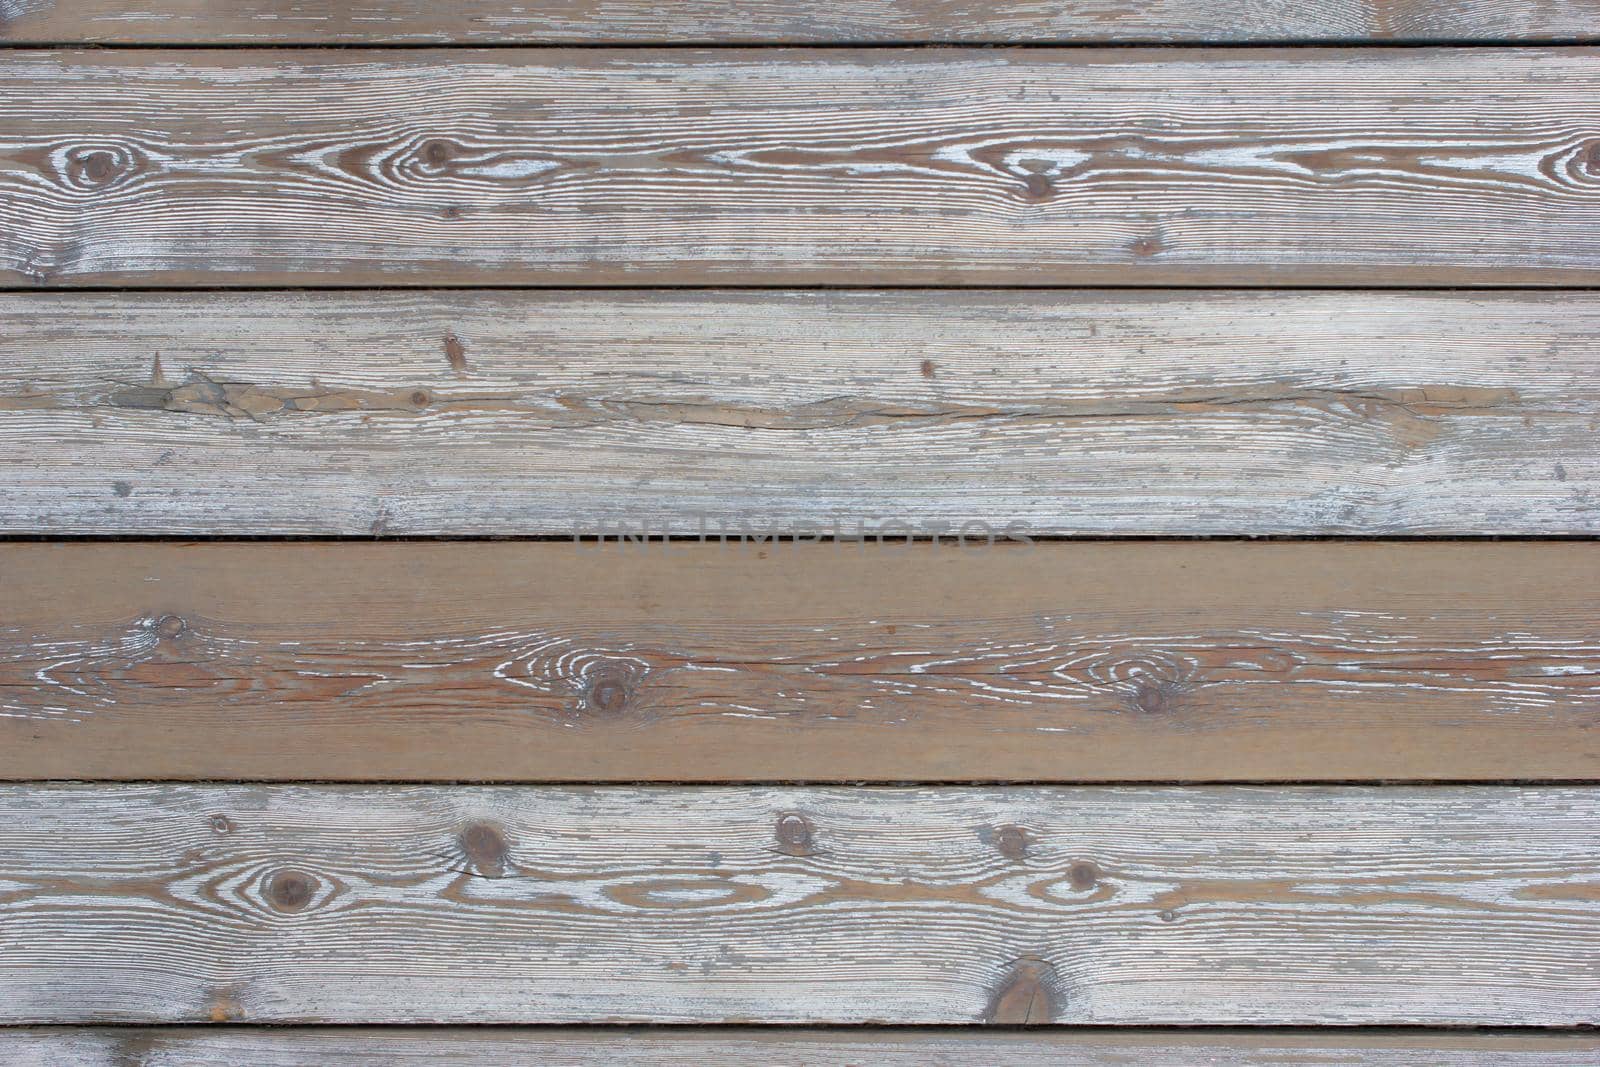 Wooden floor with beautiful texture. Texture of wooden boards, top view, close-up